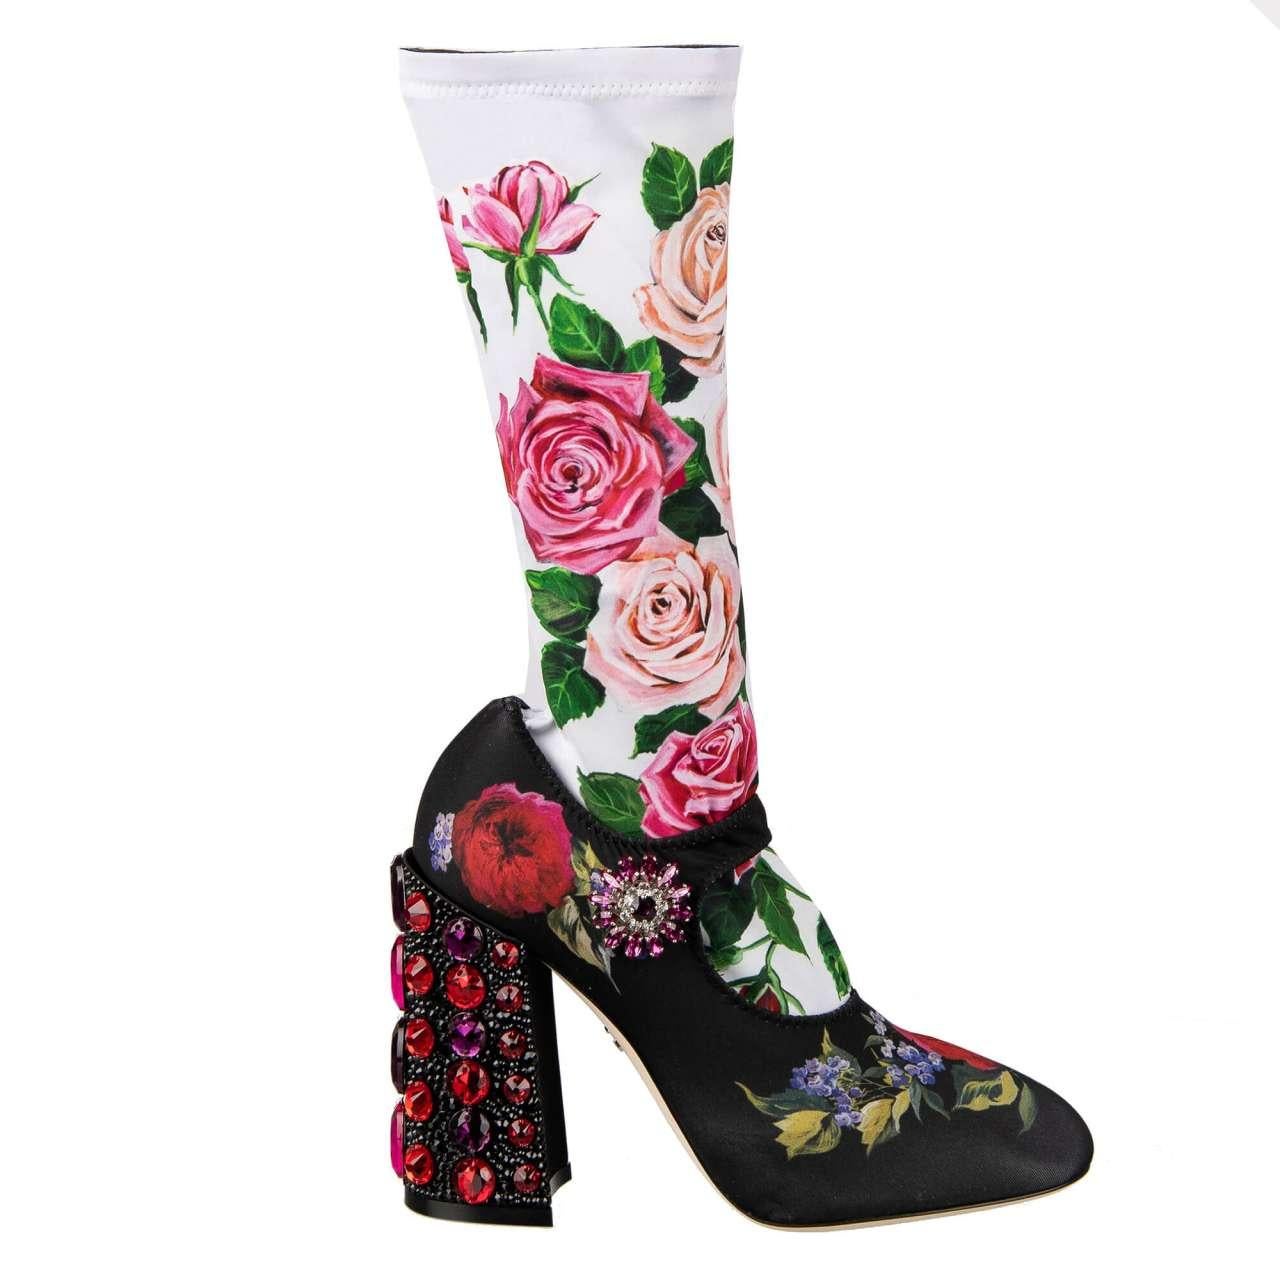 D&G Roses Printed Elastic Socks Pumps VALLY with Crystals Heel Black White 36 For Sale 3